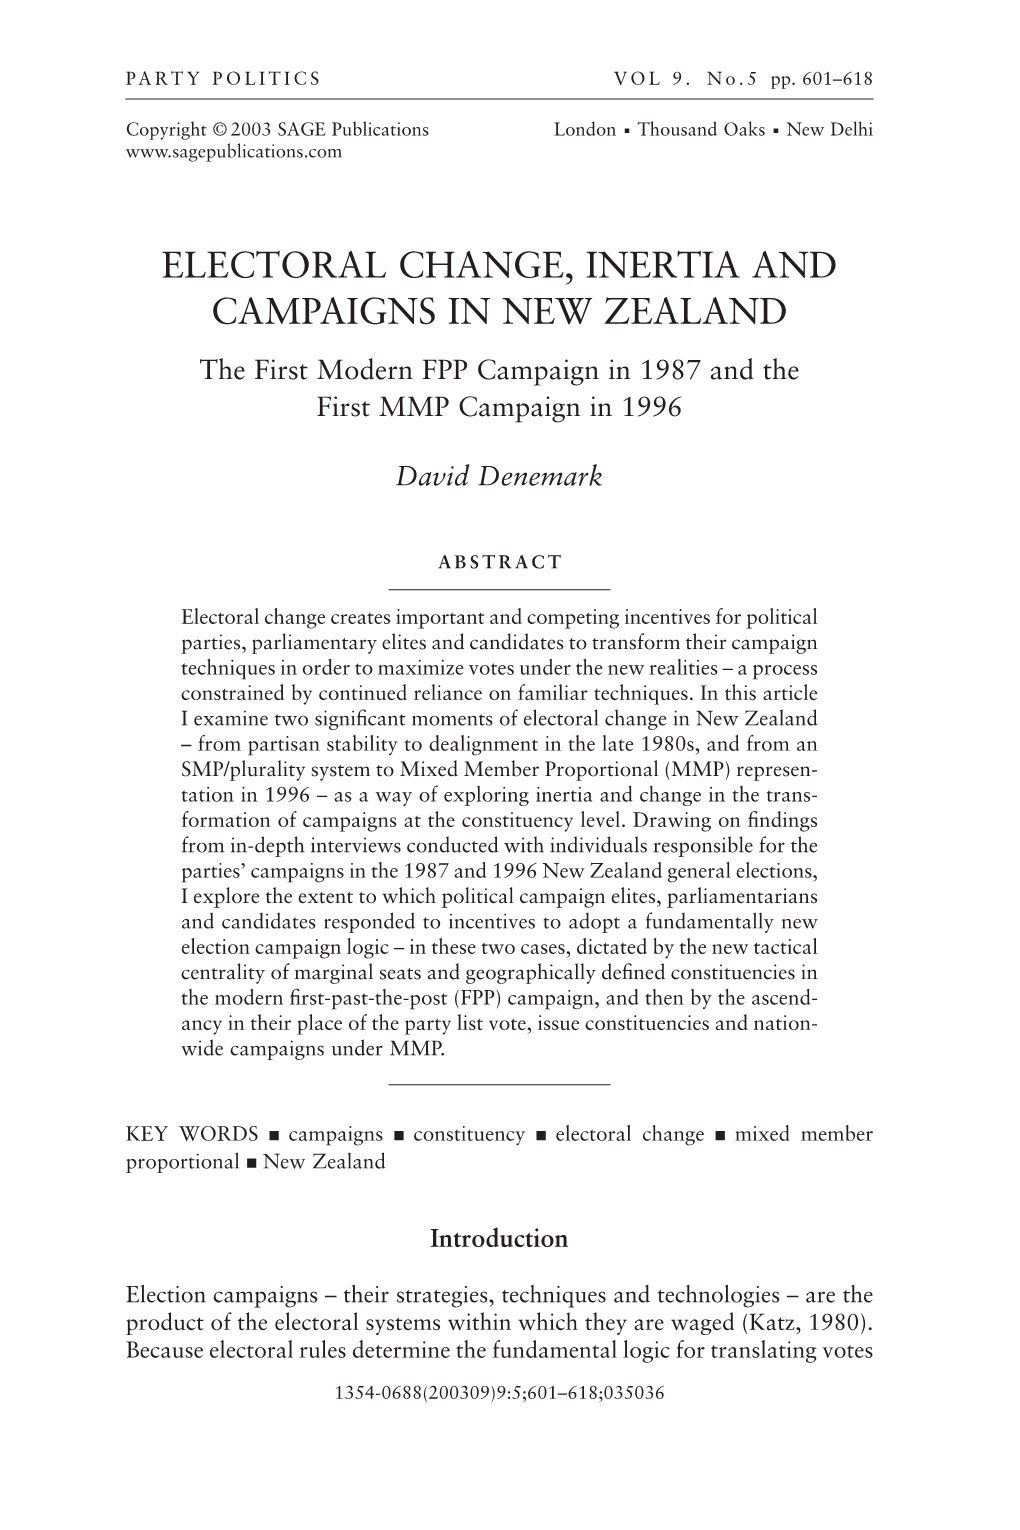 ELECTORAL CHANGE, INERTIA and CAMPAIGNS in NEW ZEALAND the First Modern FPP Campaign in 1987 and the First MMP Campaign in 1996